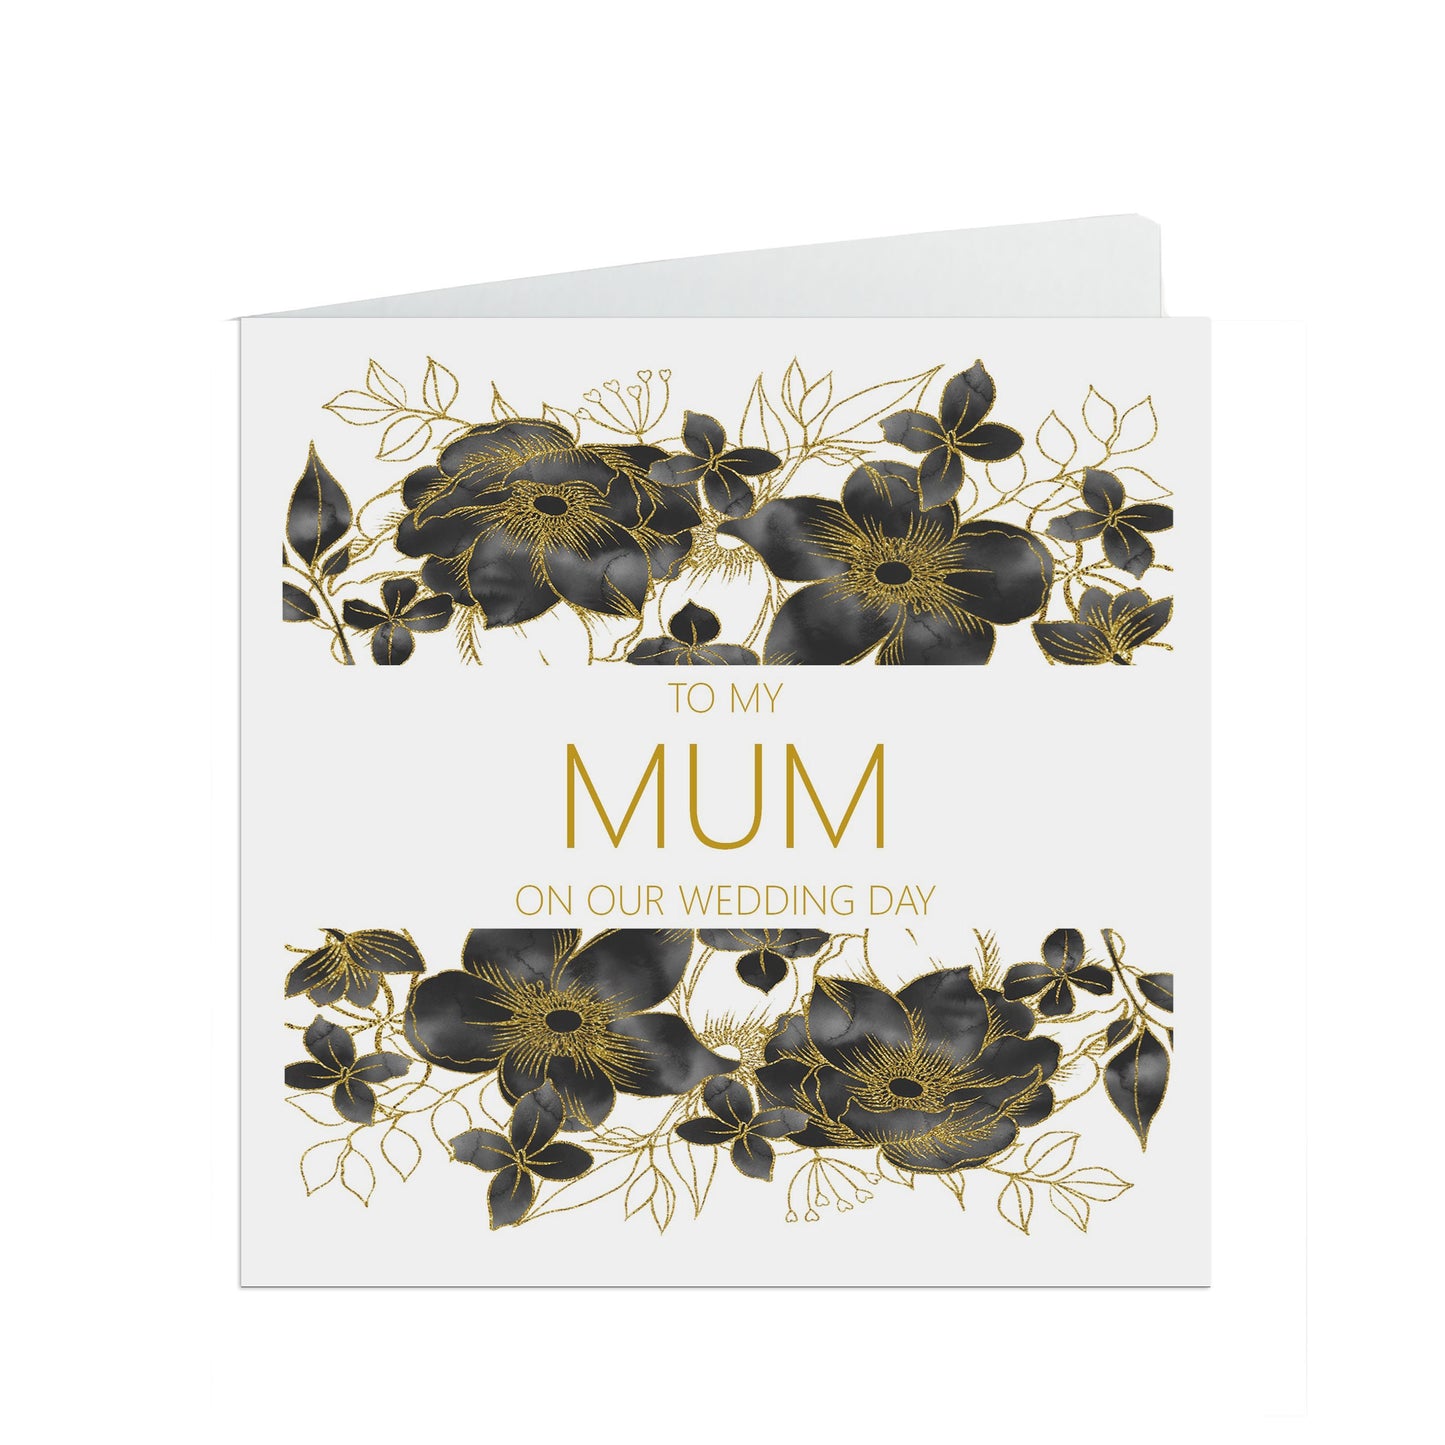 Mum On Our Wedding Day Card, Black & Gold Floral 6x6 Inches With A White Envelope